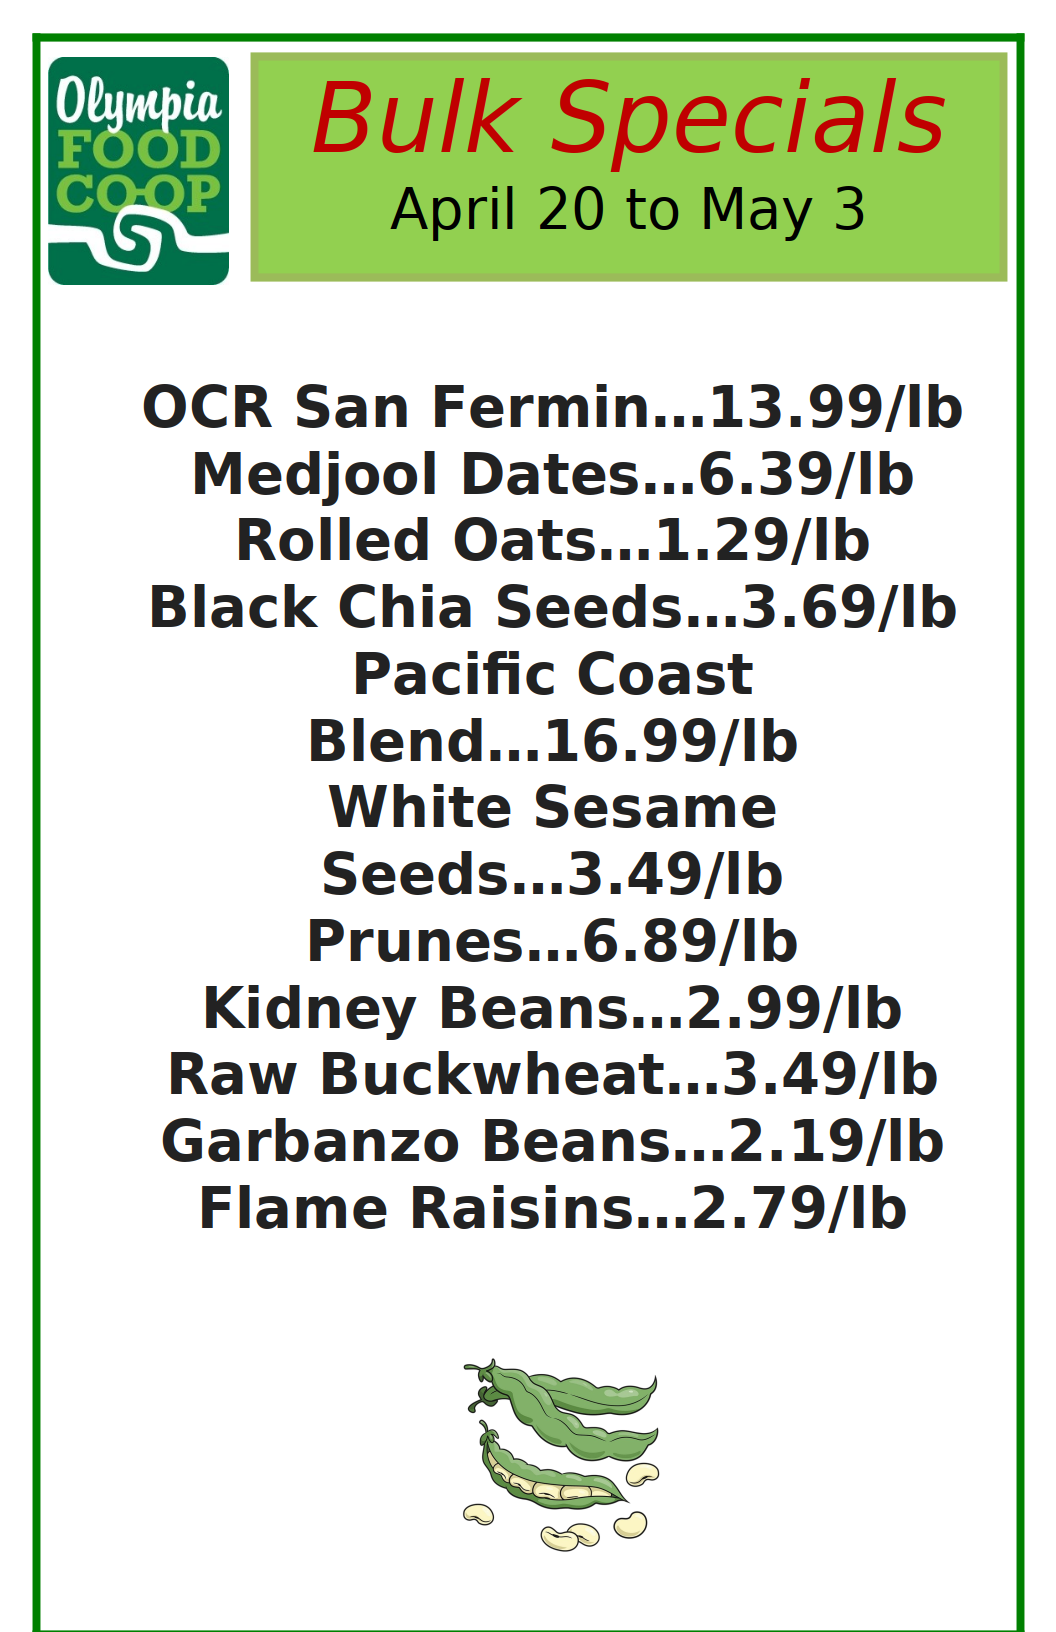 All prices per pound unless indicated. Olympia Coffee Roasters' San Fermin $13.99, Medjool Dates $6.39, Rolled Oats $1.29, Black Chia Seeds $3.69, Pacific Coast Blend Coffee $16.99, White Sesame Seeds $3.49, Prunes $6.89, Kidney Beans $2.99, Raw Buckwheat $3.49, Garbanzo Beans $2.19, Flame Raisins $2.79